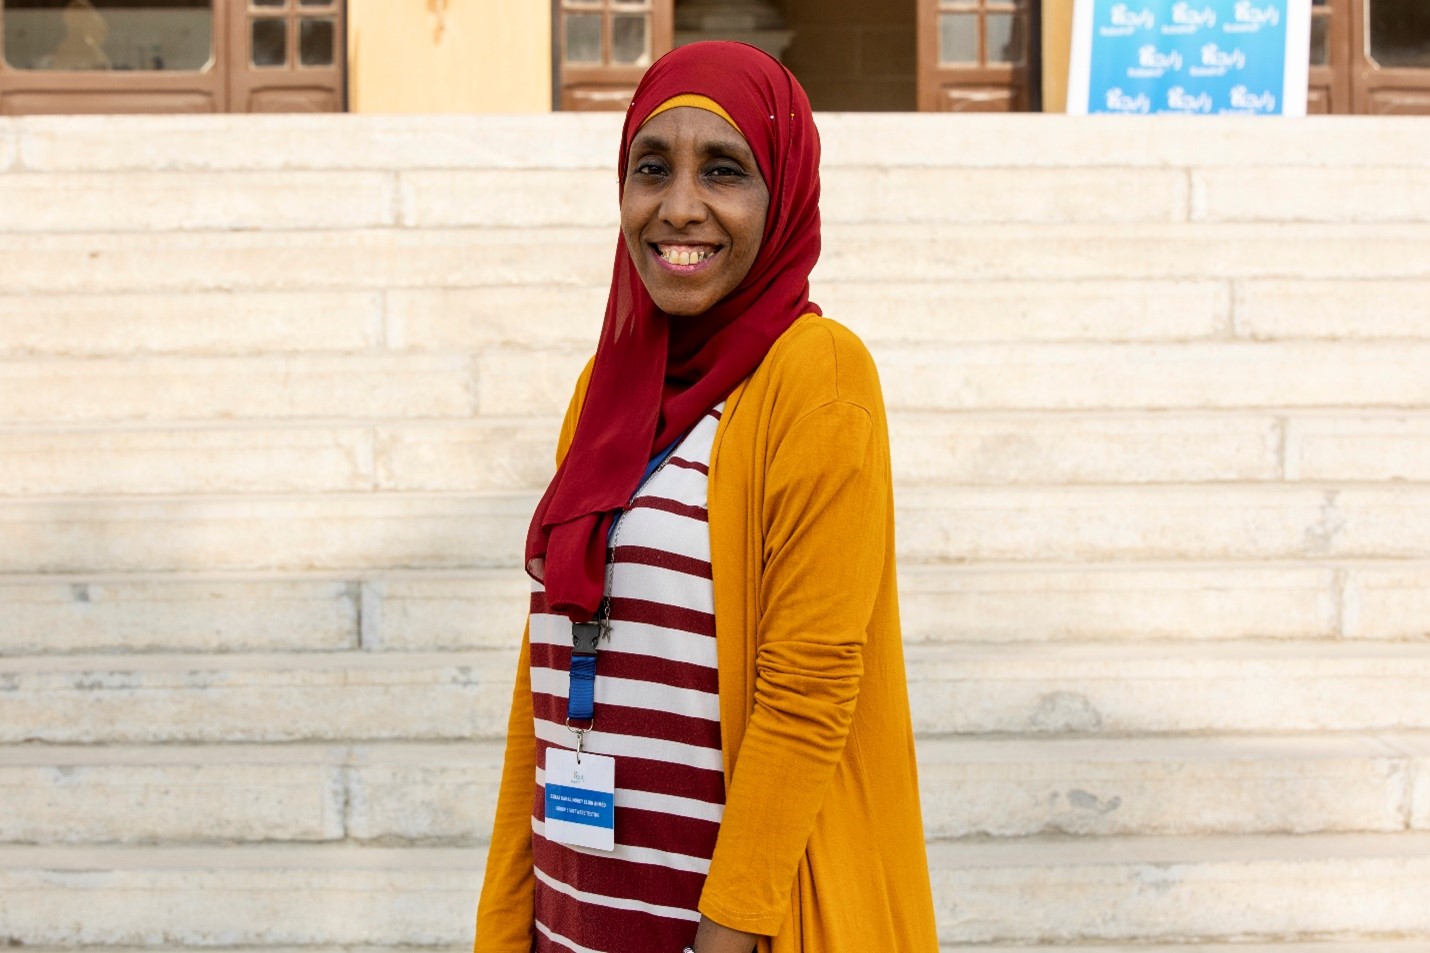 Israa Gamal Mohie El-Din at an ICT career day for women job-seekers organized for Rabeha participants on 20 October 2022 at Sultana Malak Palace. Photo: UN Women/Hady Elzeniry 